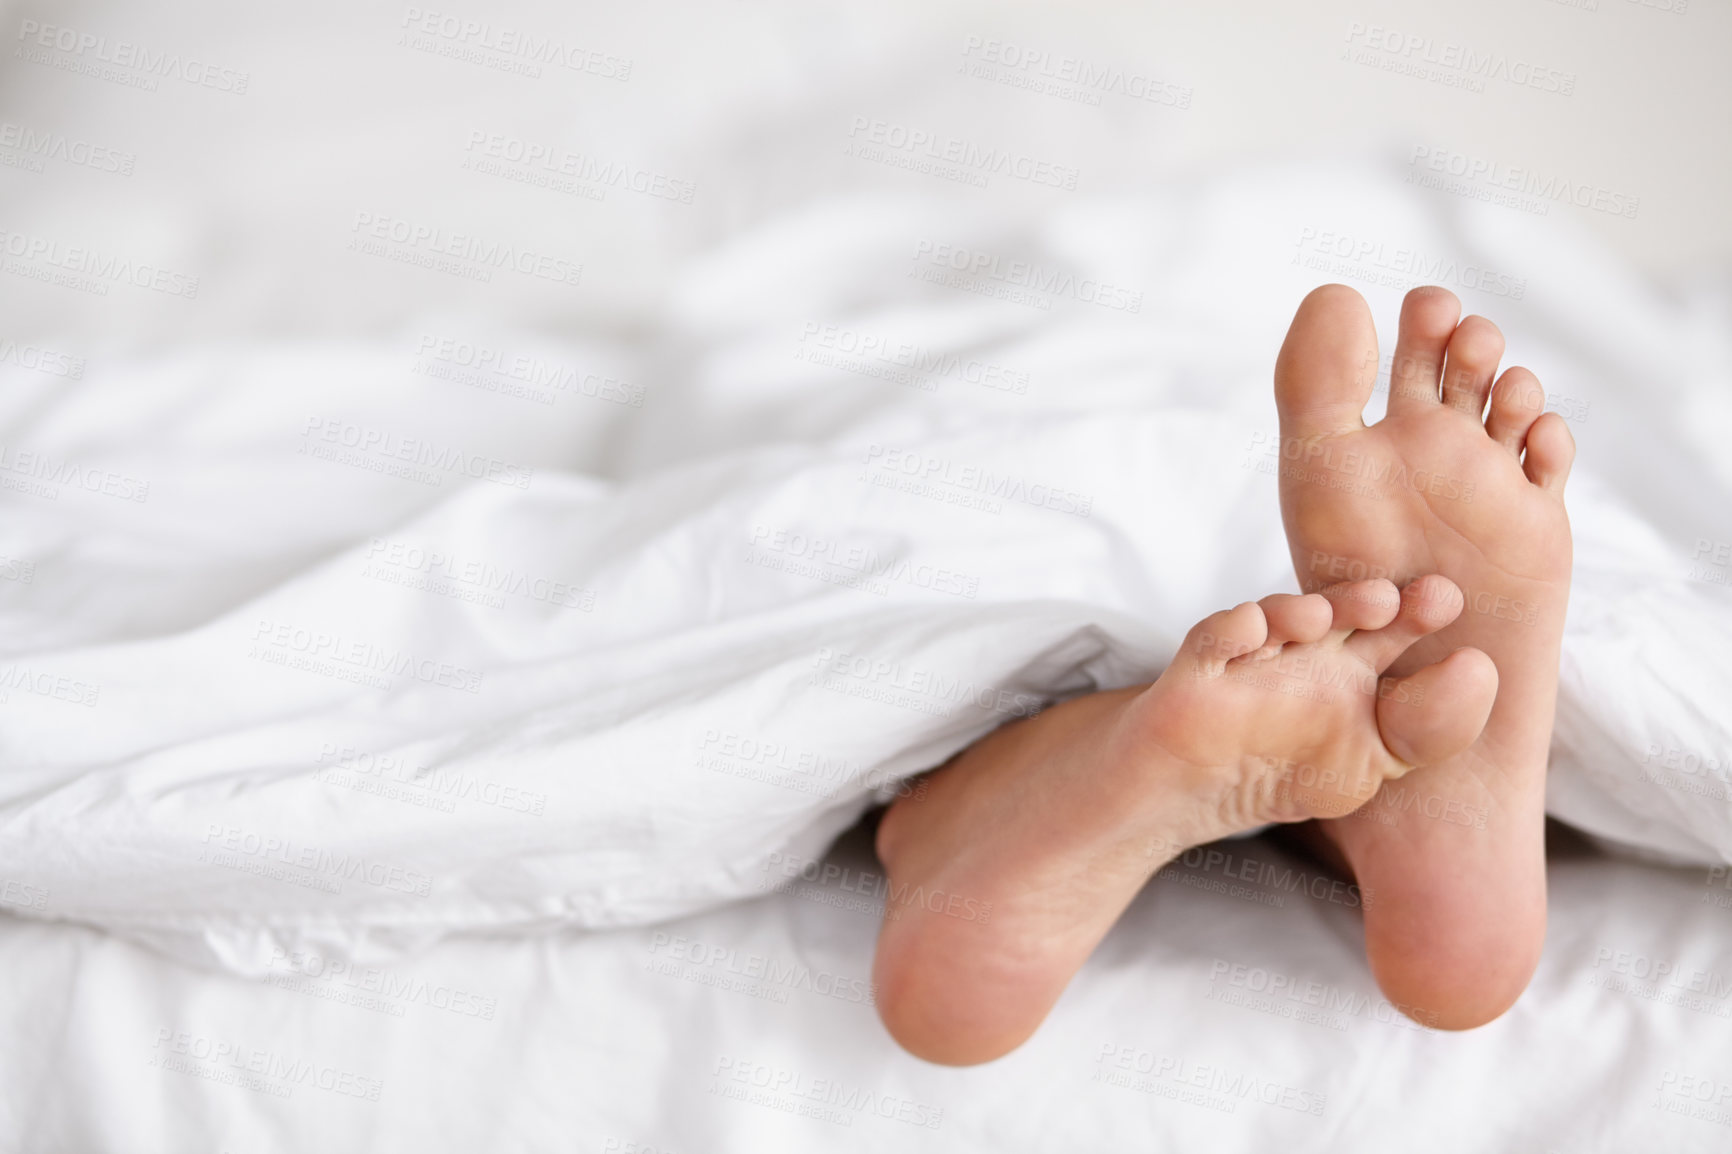 Buy stock photo Shot of a pair of woman's feet poking out from under the sheets of a bed